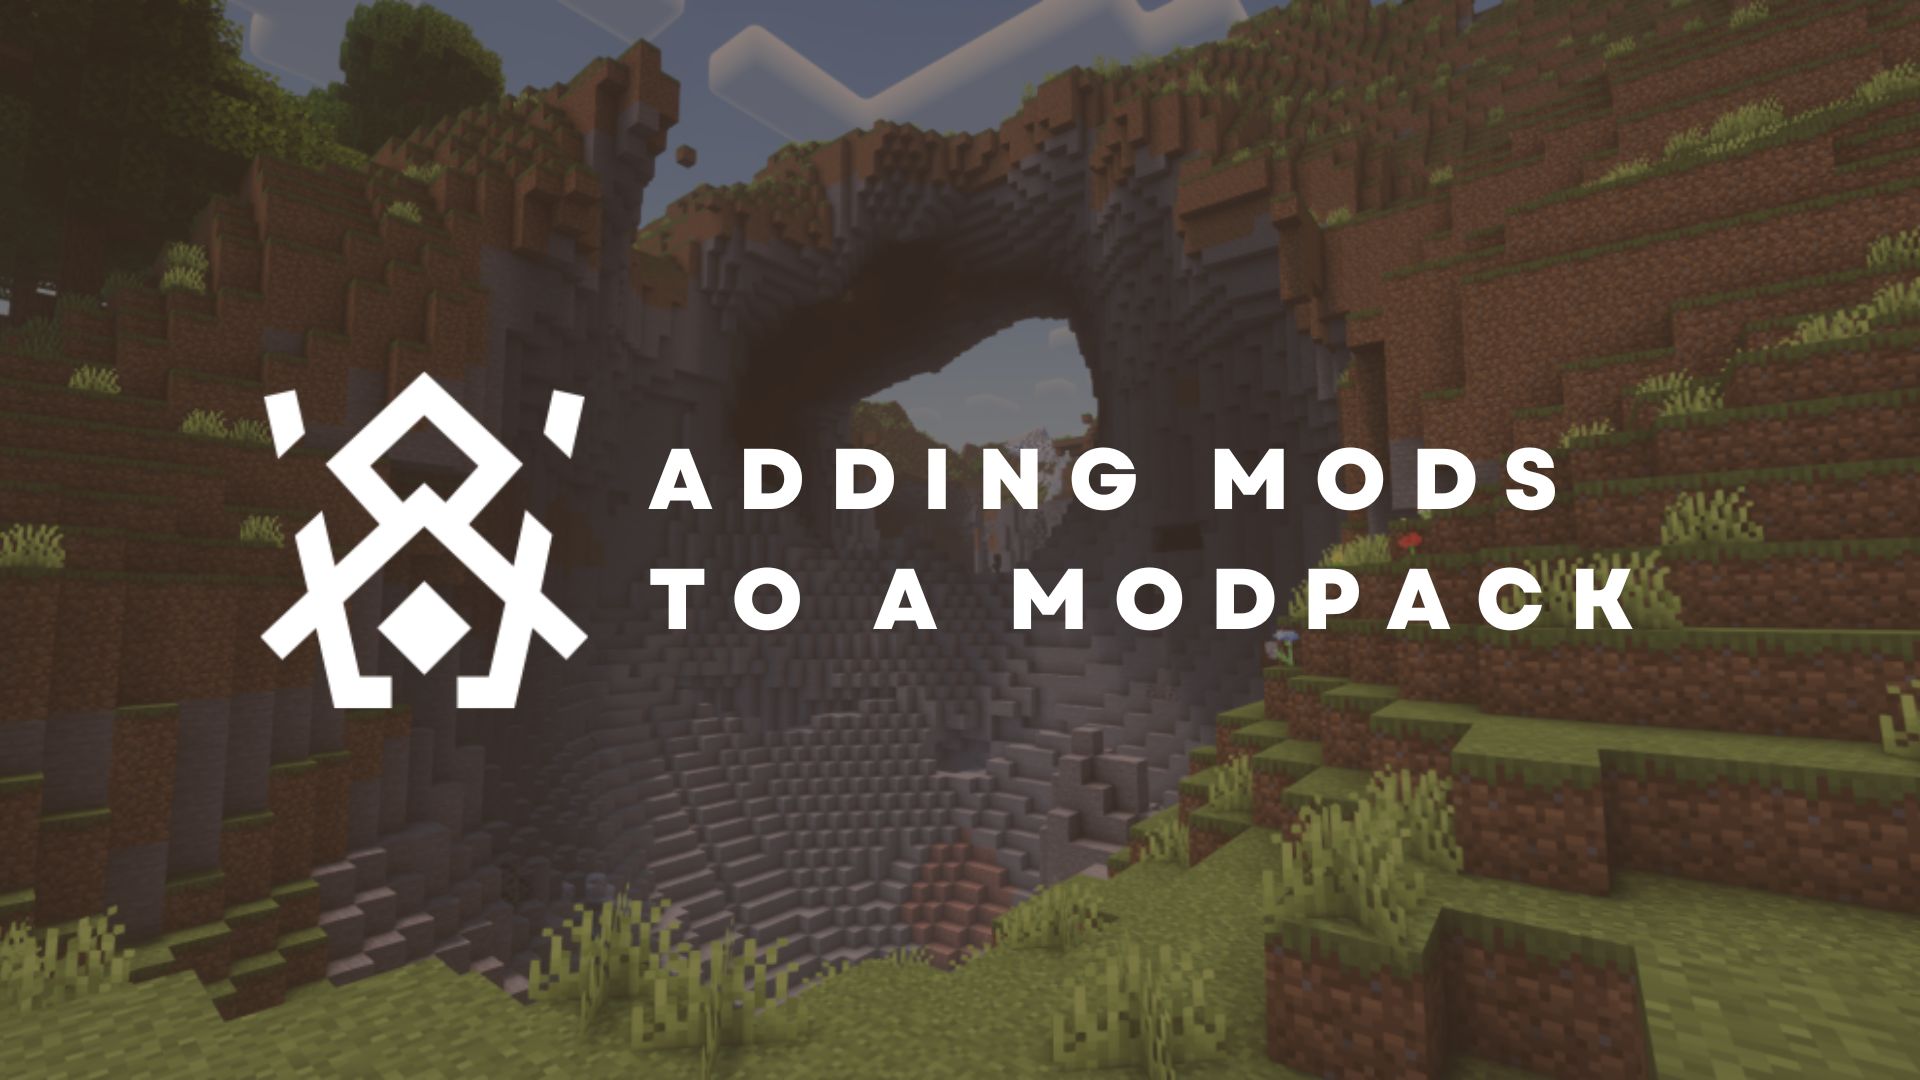 How to add Mods to a Modpack